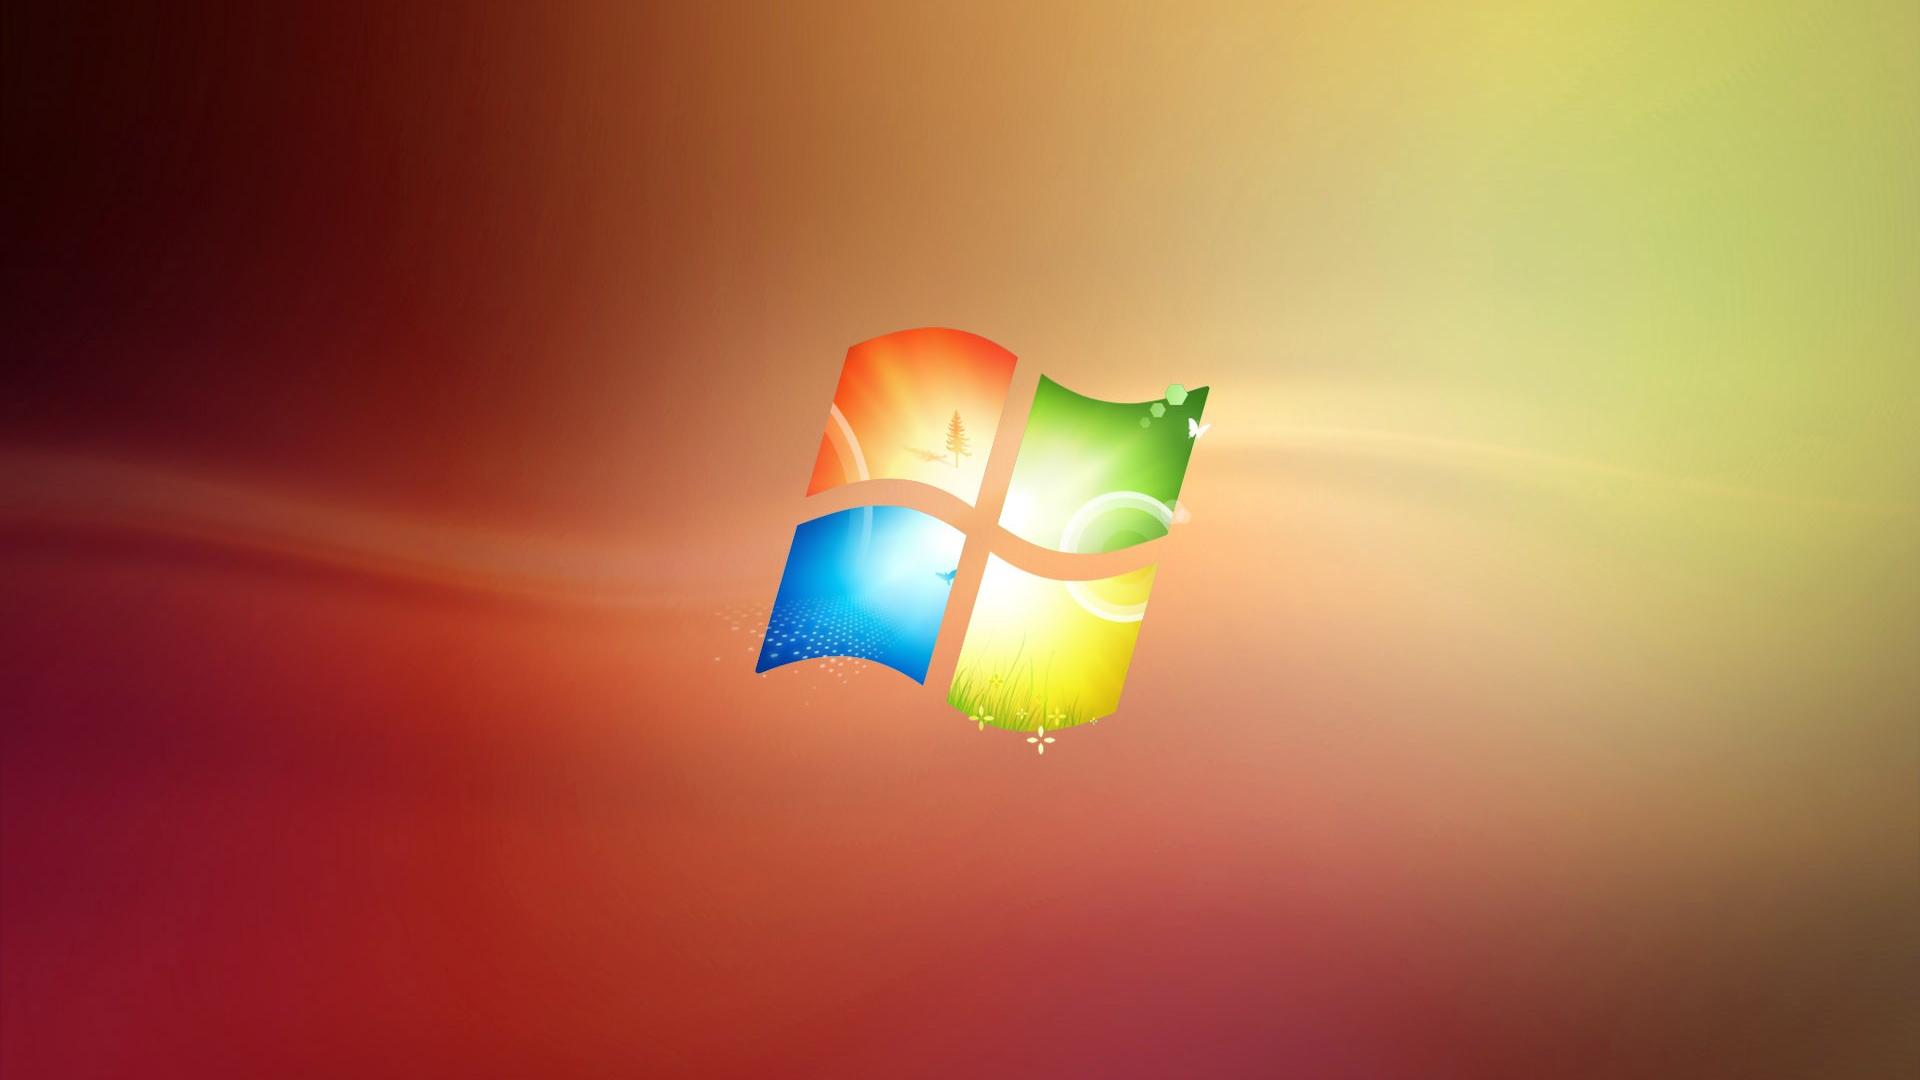 Cool Windows 7 System Colorful Background